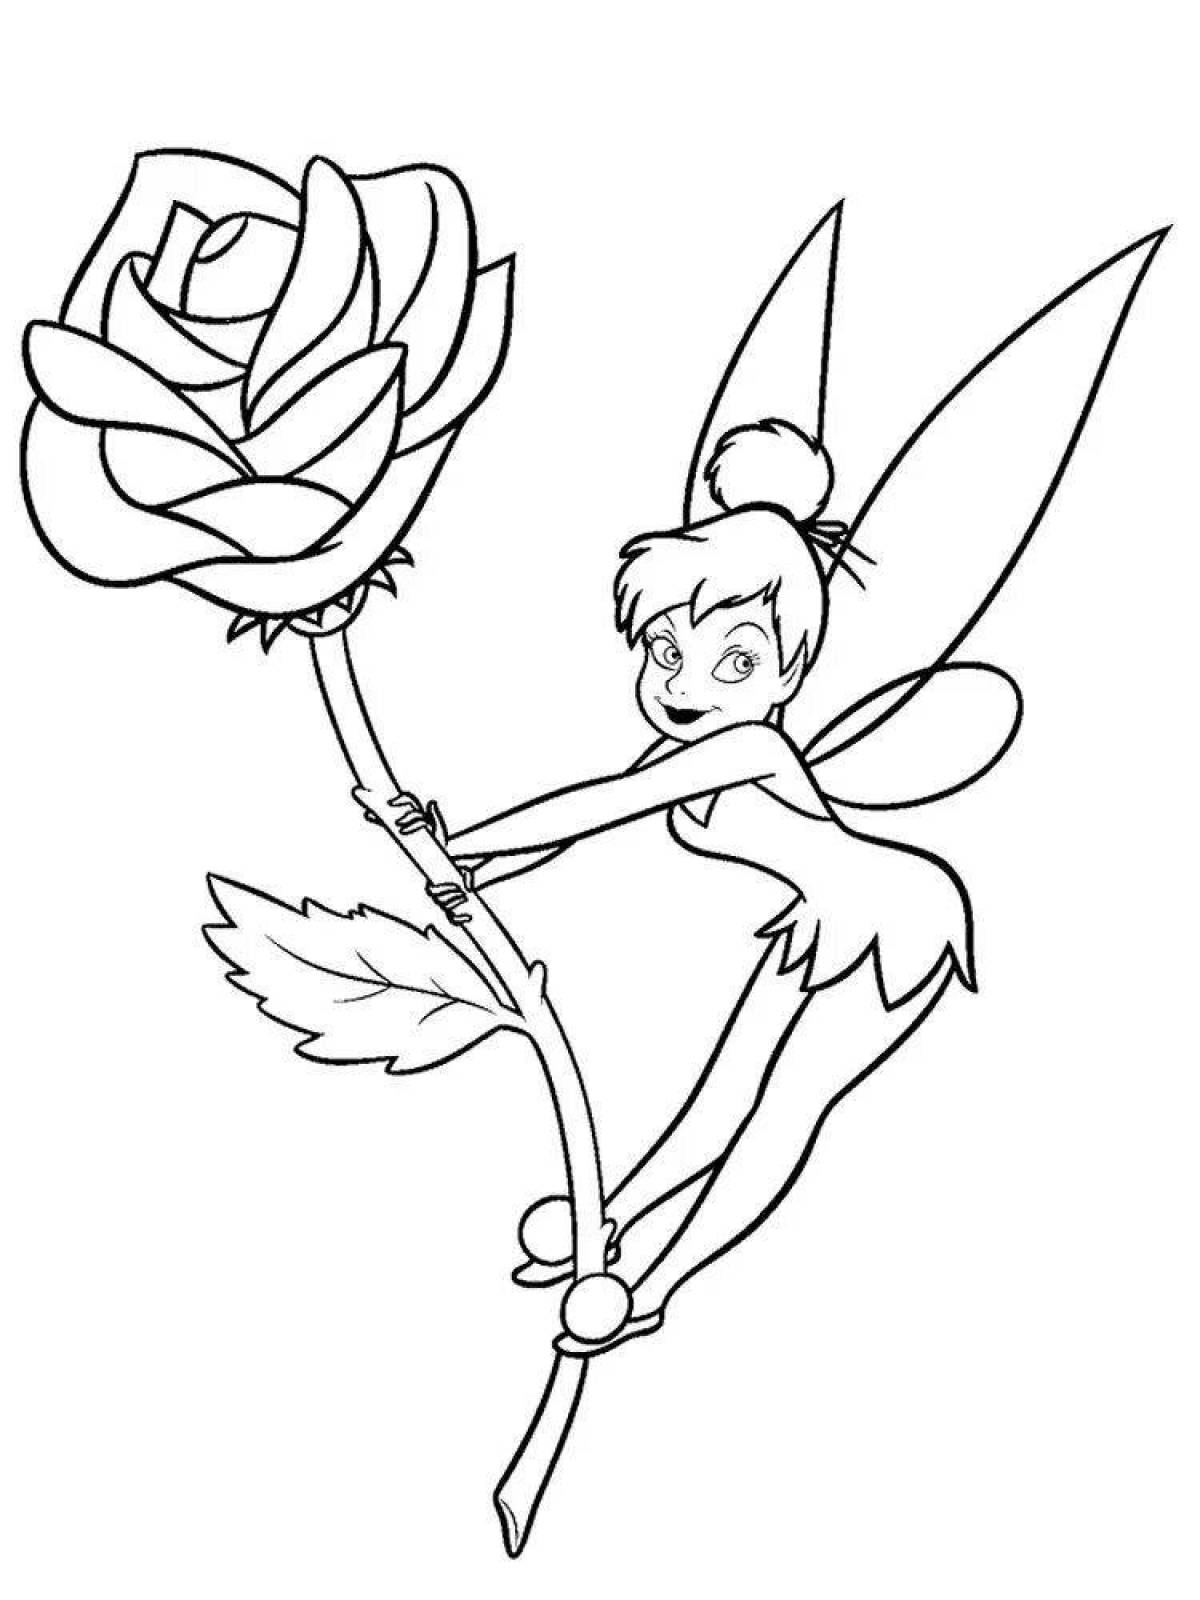 Shining fairy coloring pages